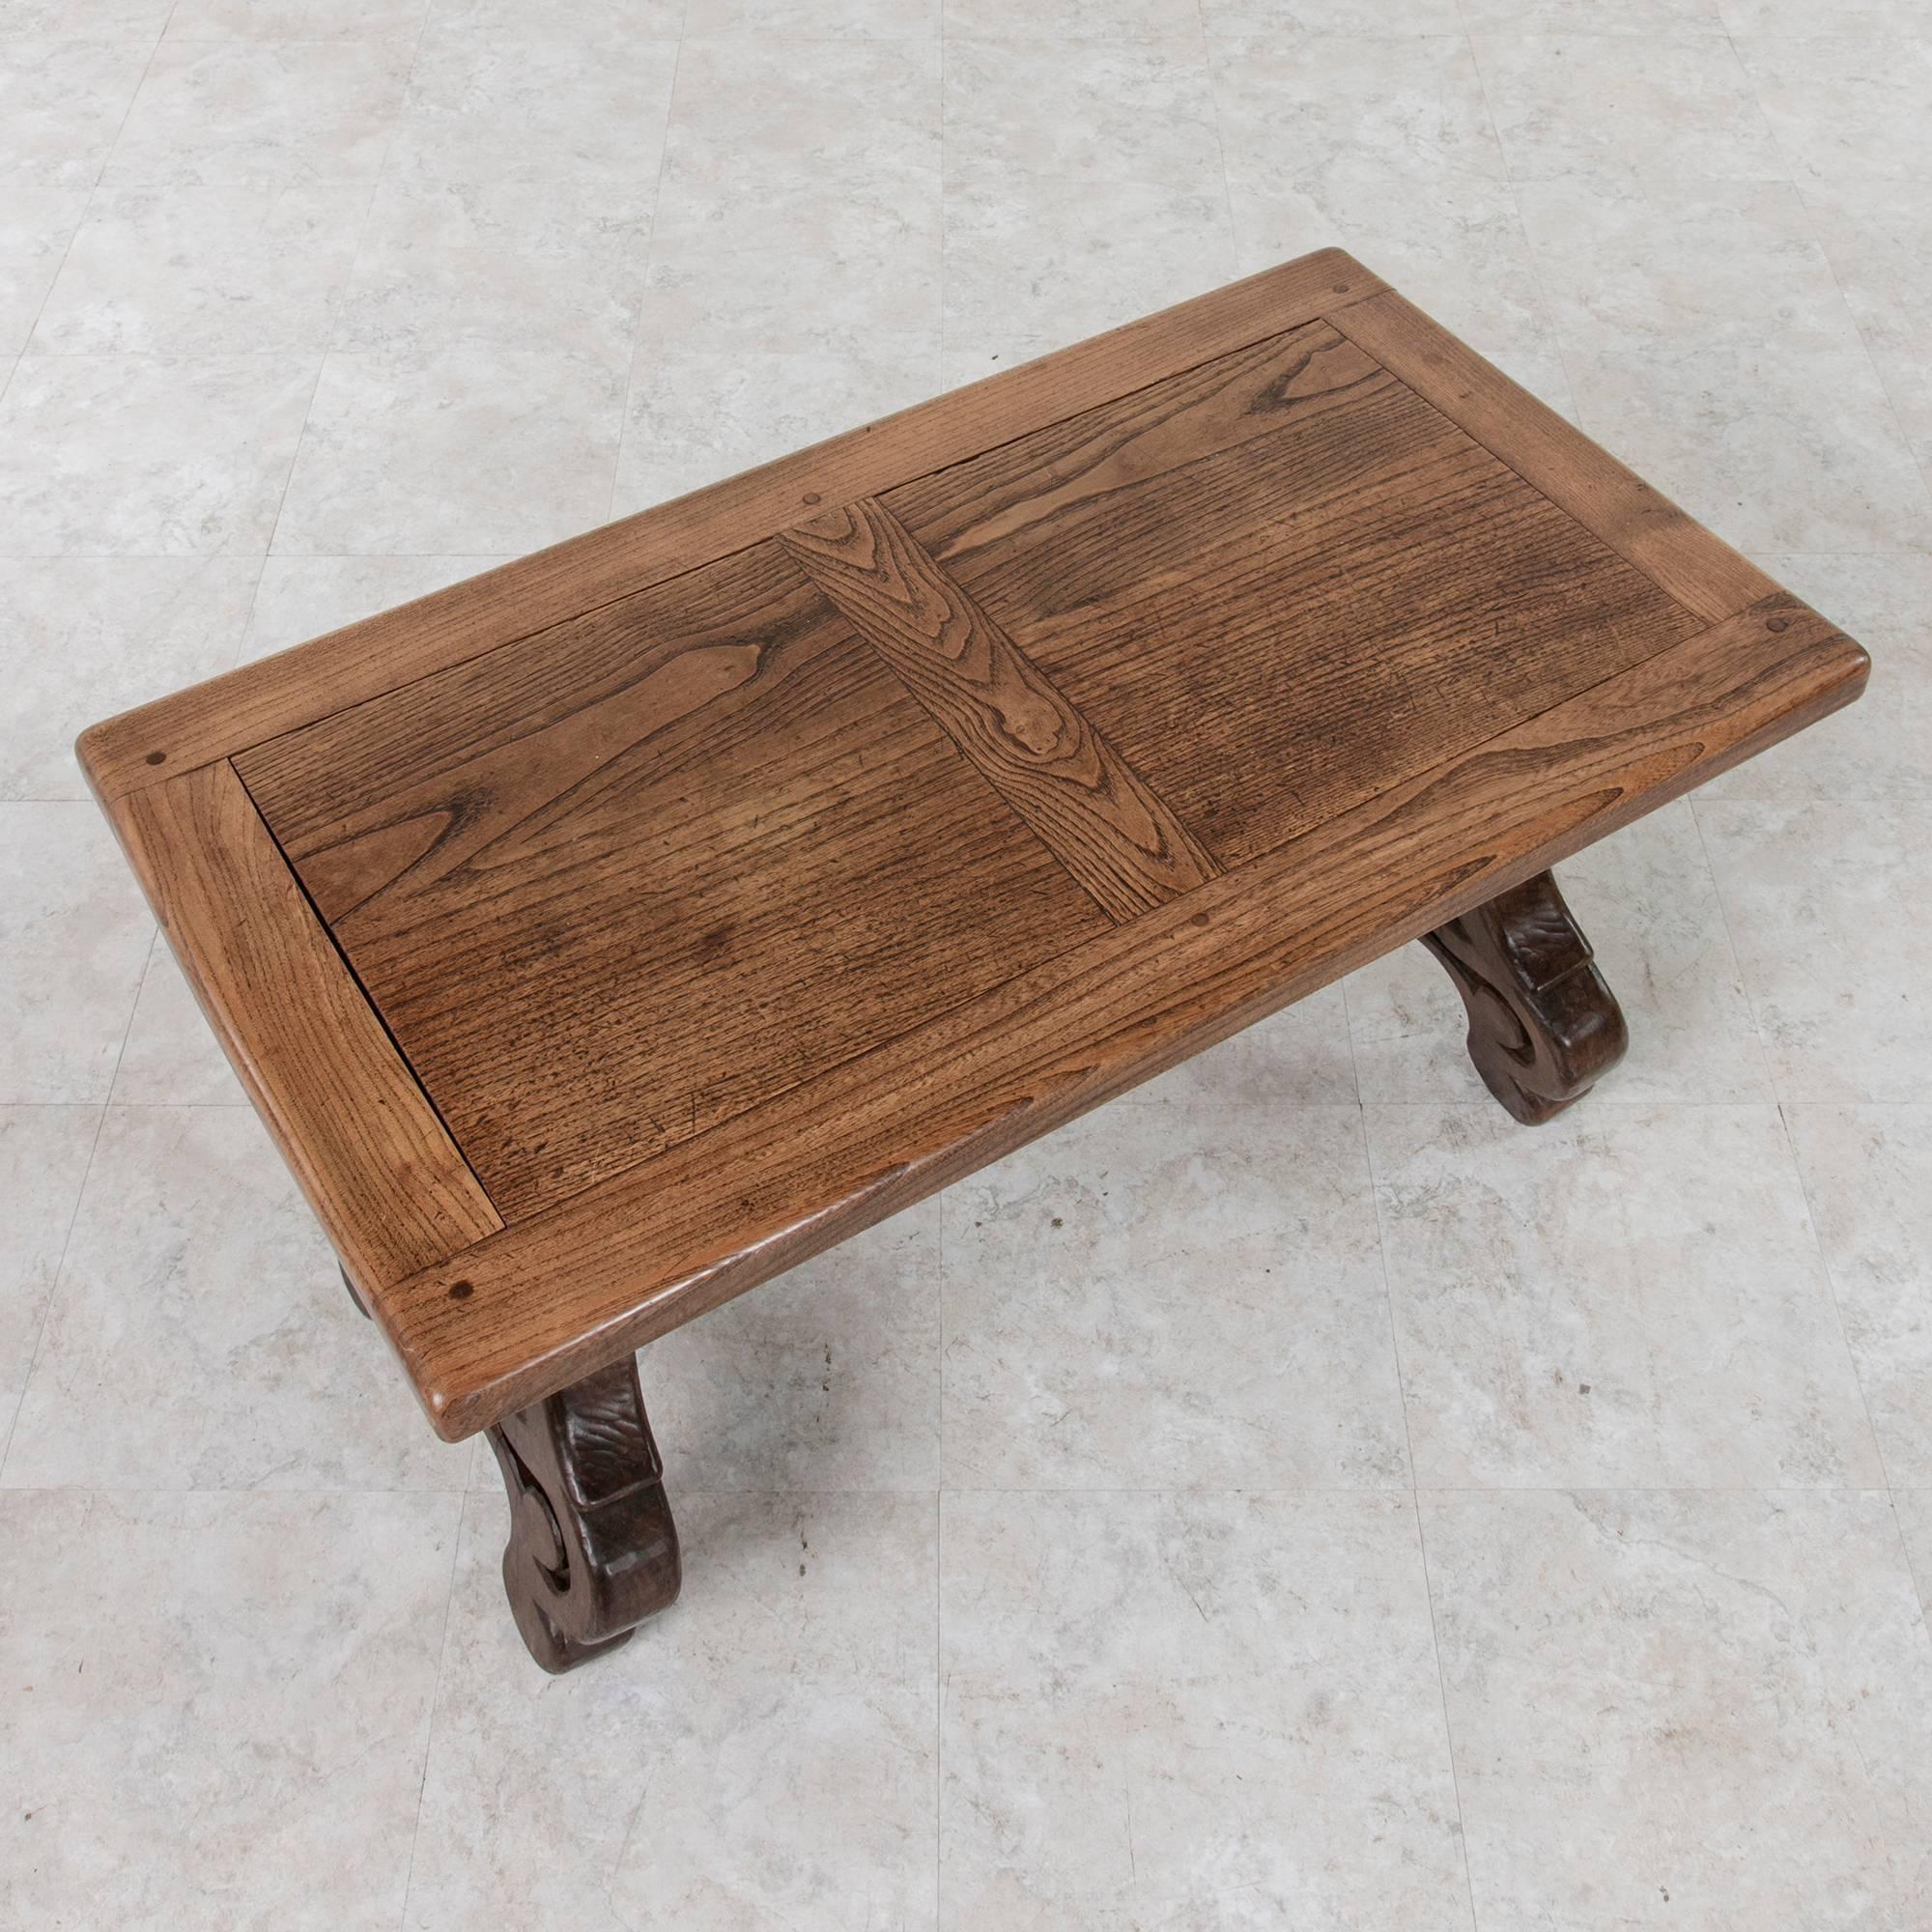 With the warm tones of the wood that give it an old world feel, this Spanish style oak coffee table features a framed top of hand pegged construction mounted on hand-carved lyre shaped trestle legs raised on volutes. A hand-forged wrought iron